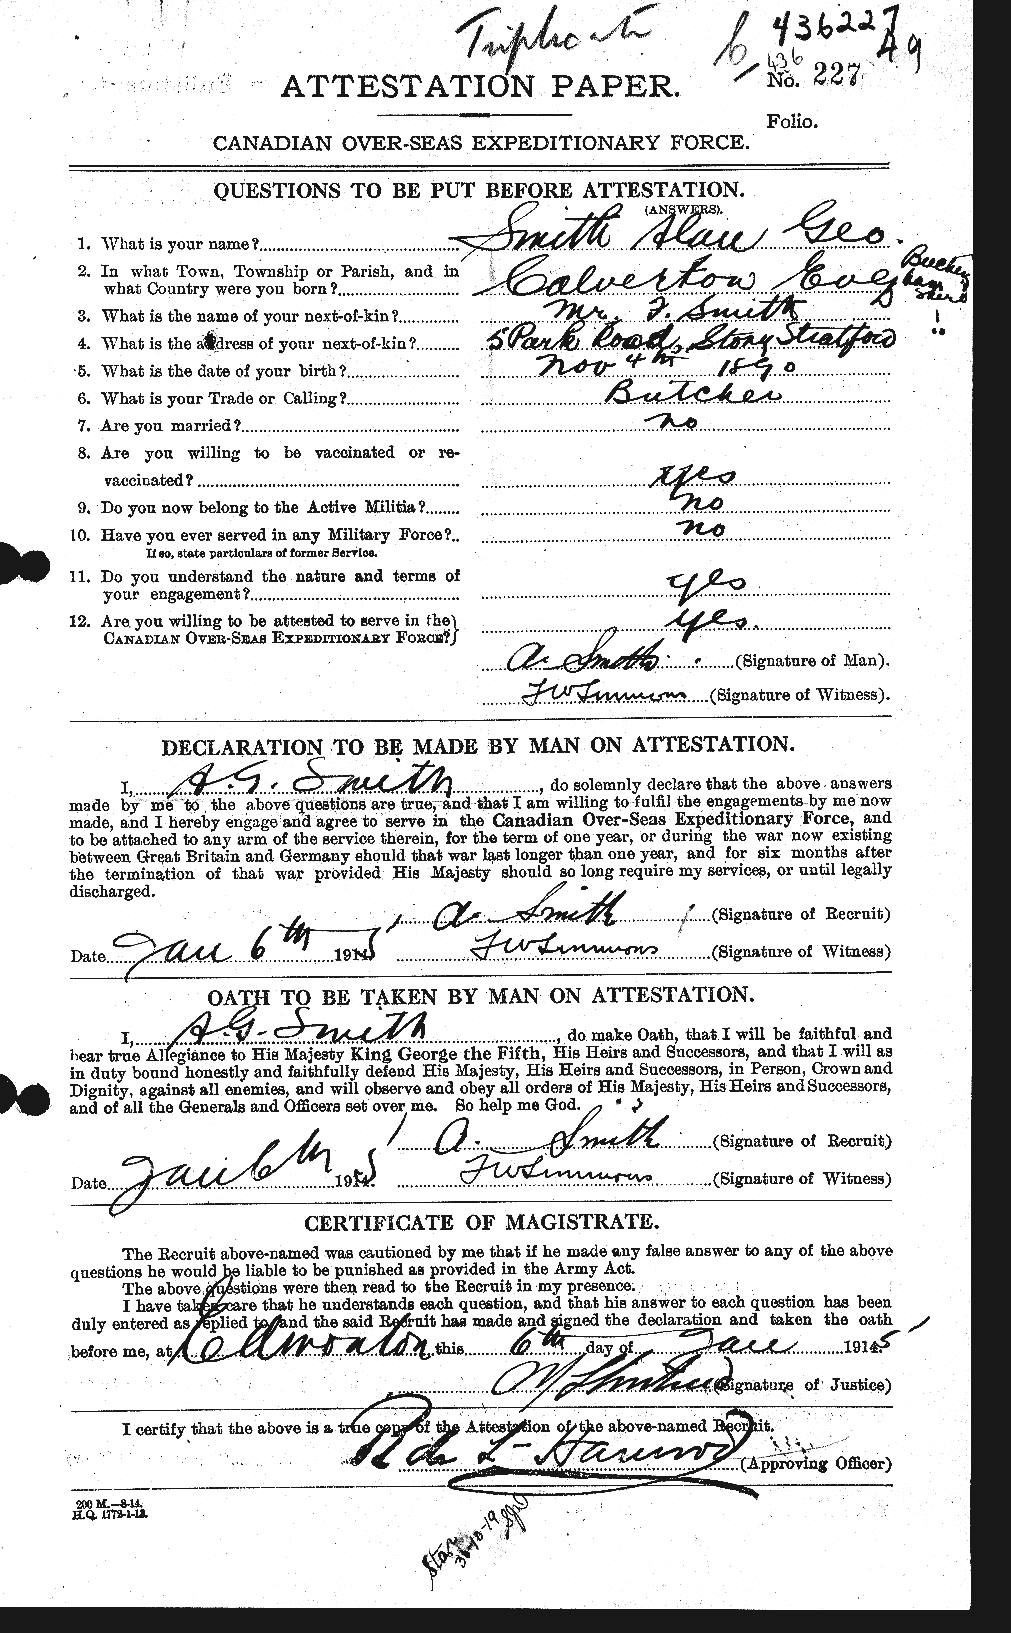 Personnel Records of the First World War - CEF 099226a